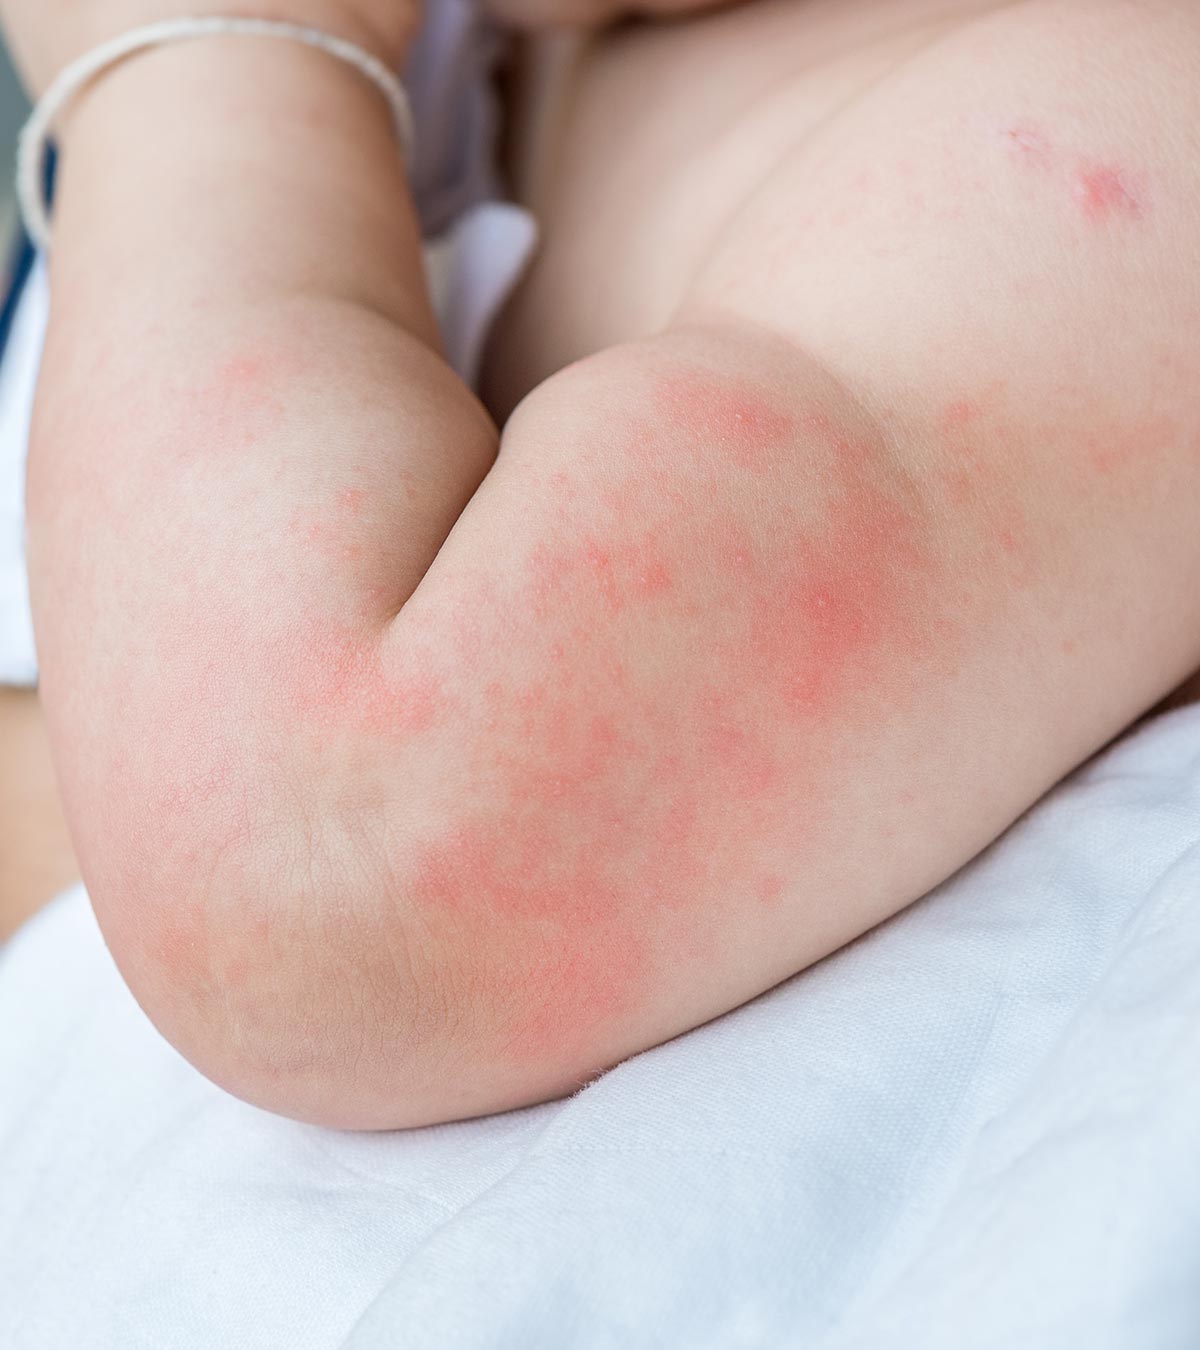 Hives In Babies